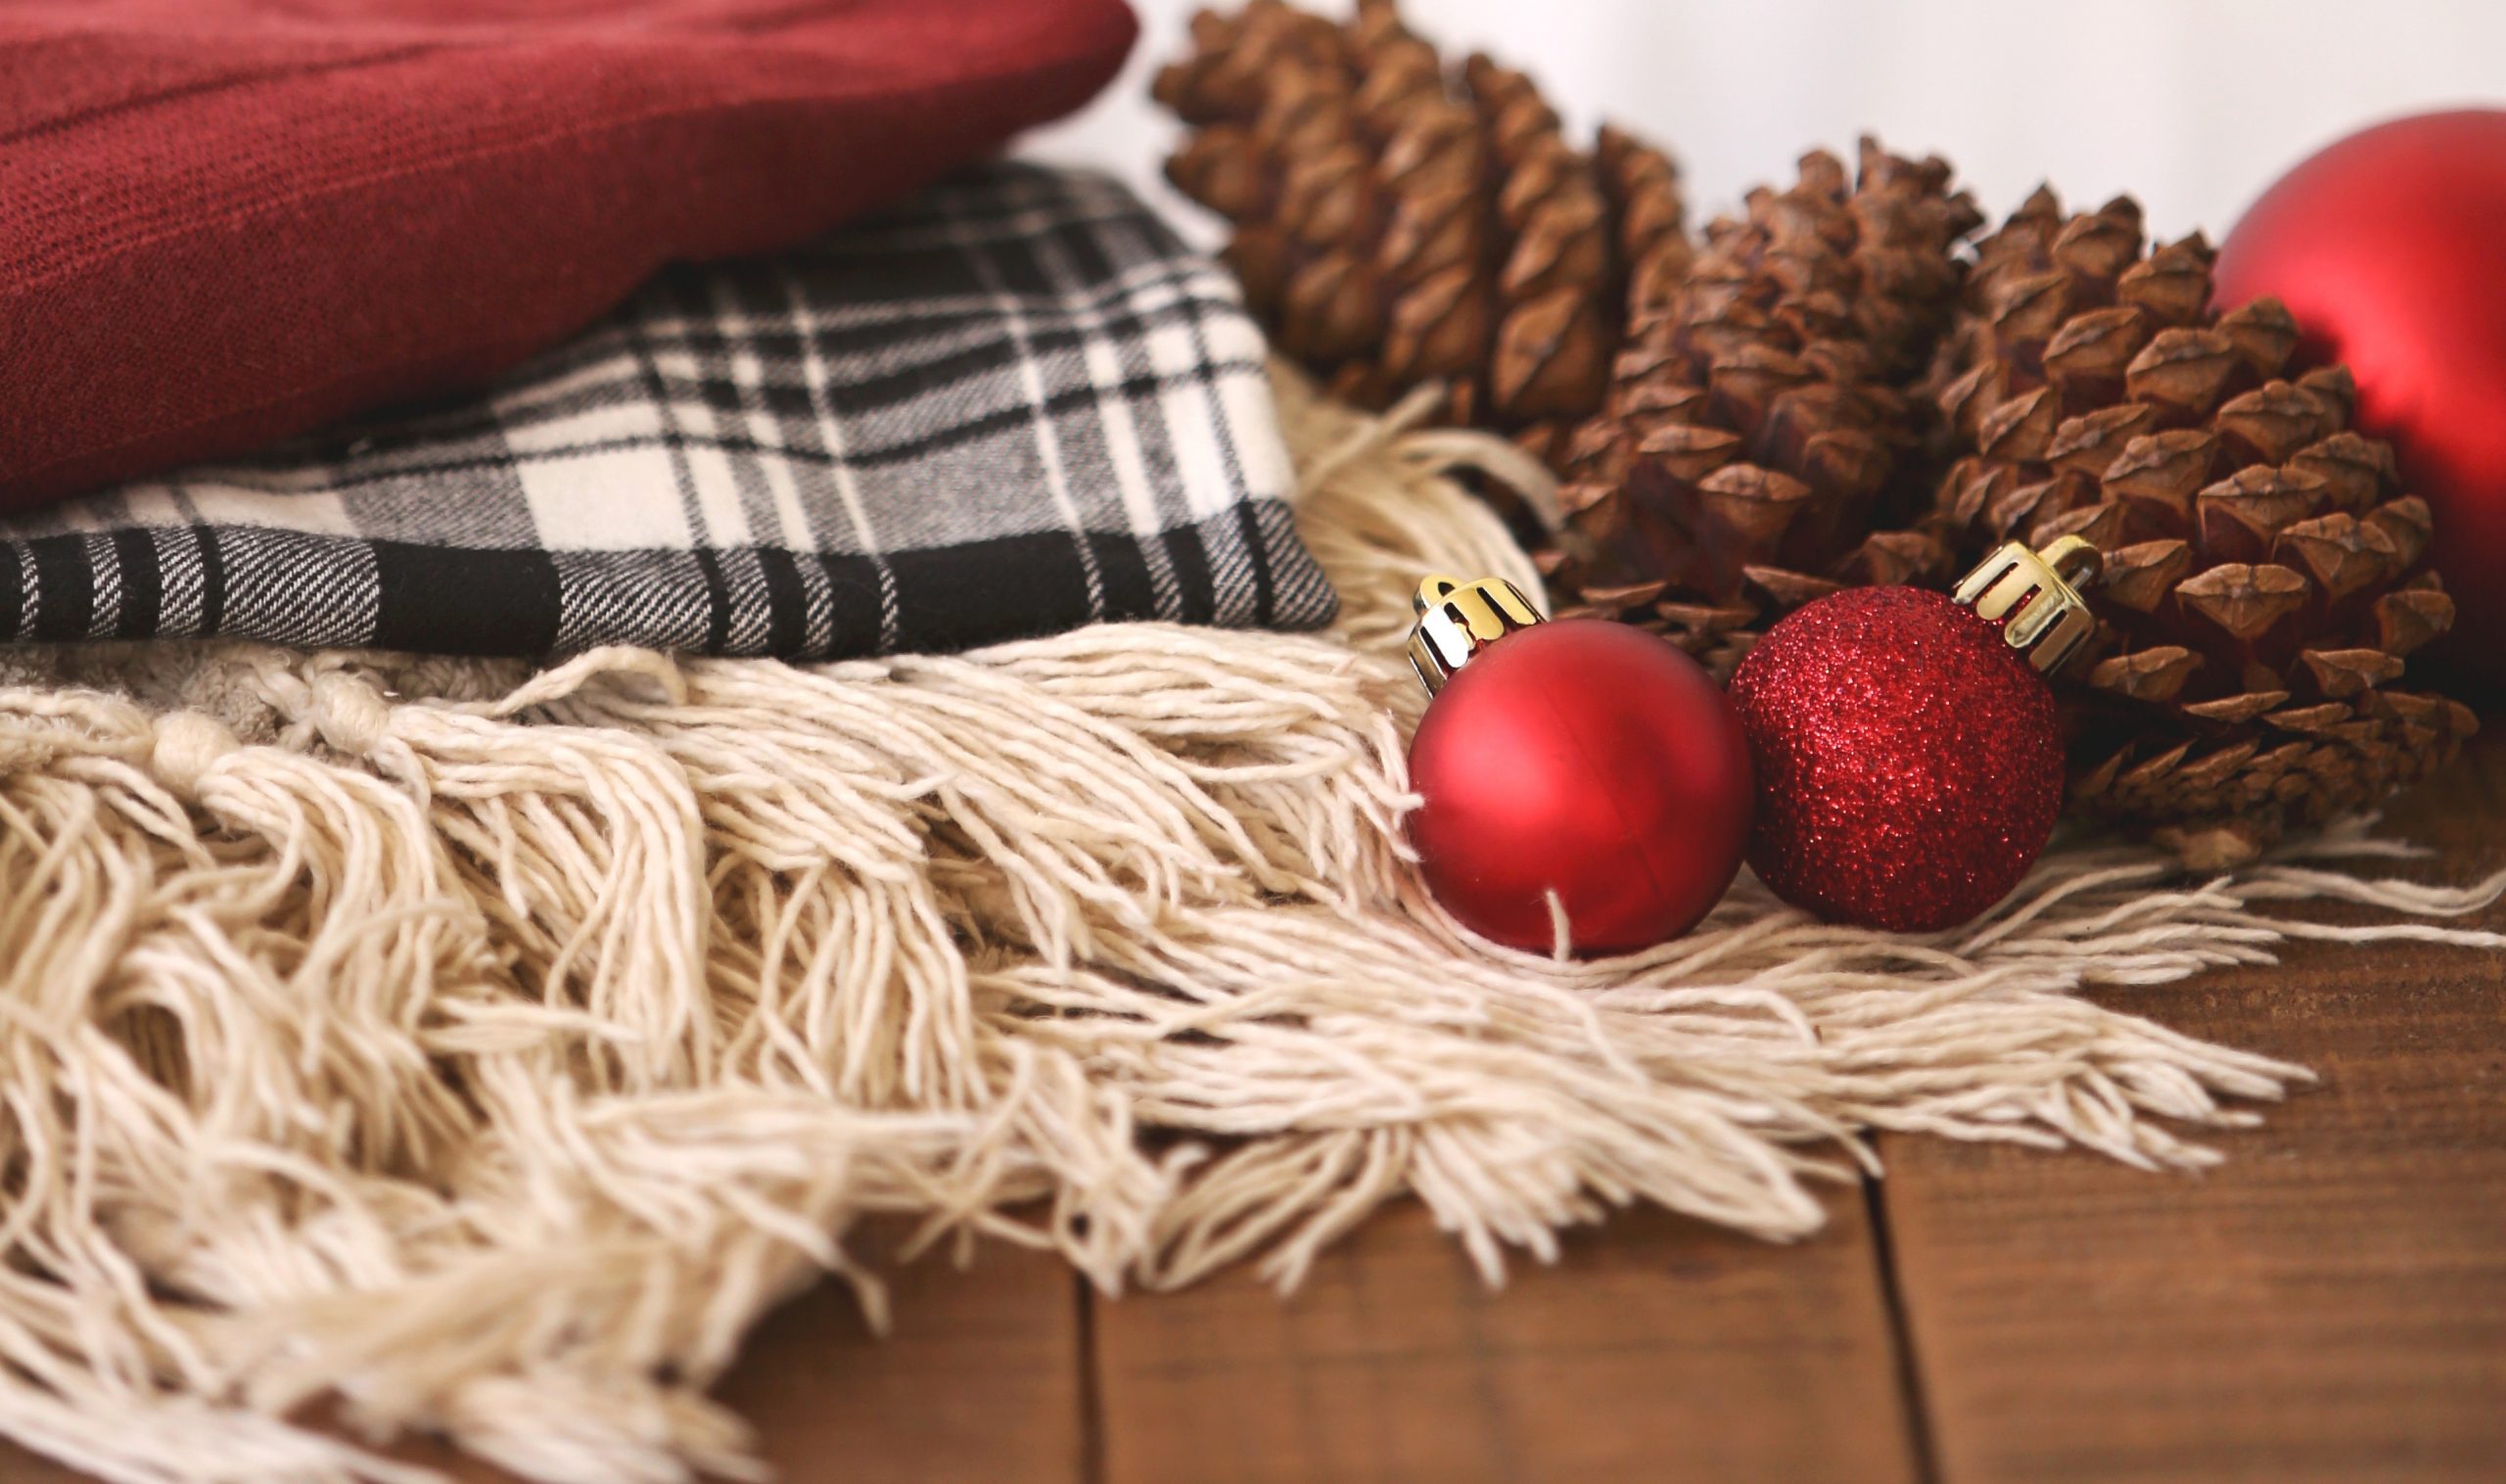 From Holidays to Winter: A Guide to Transitioning Your Decorations